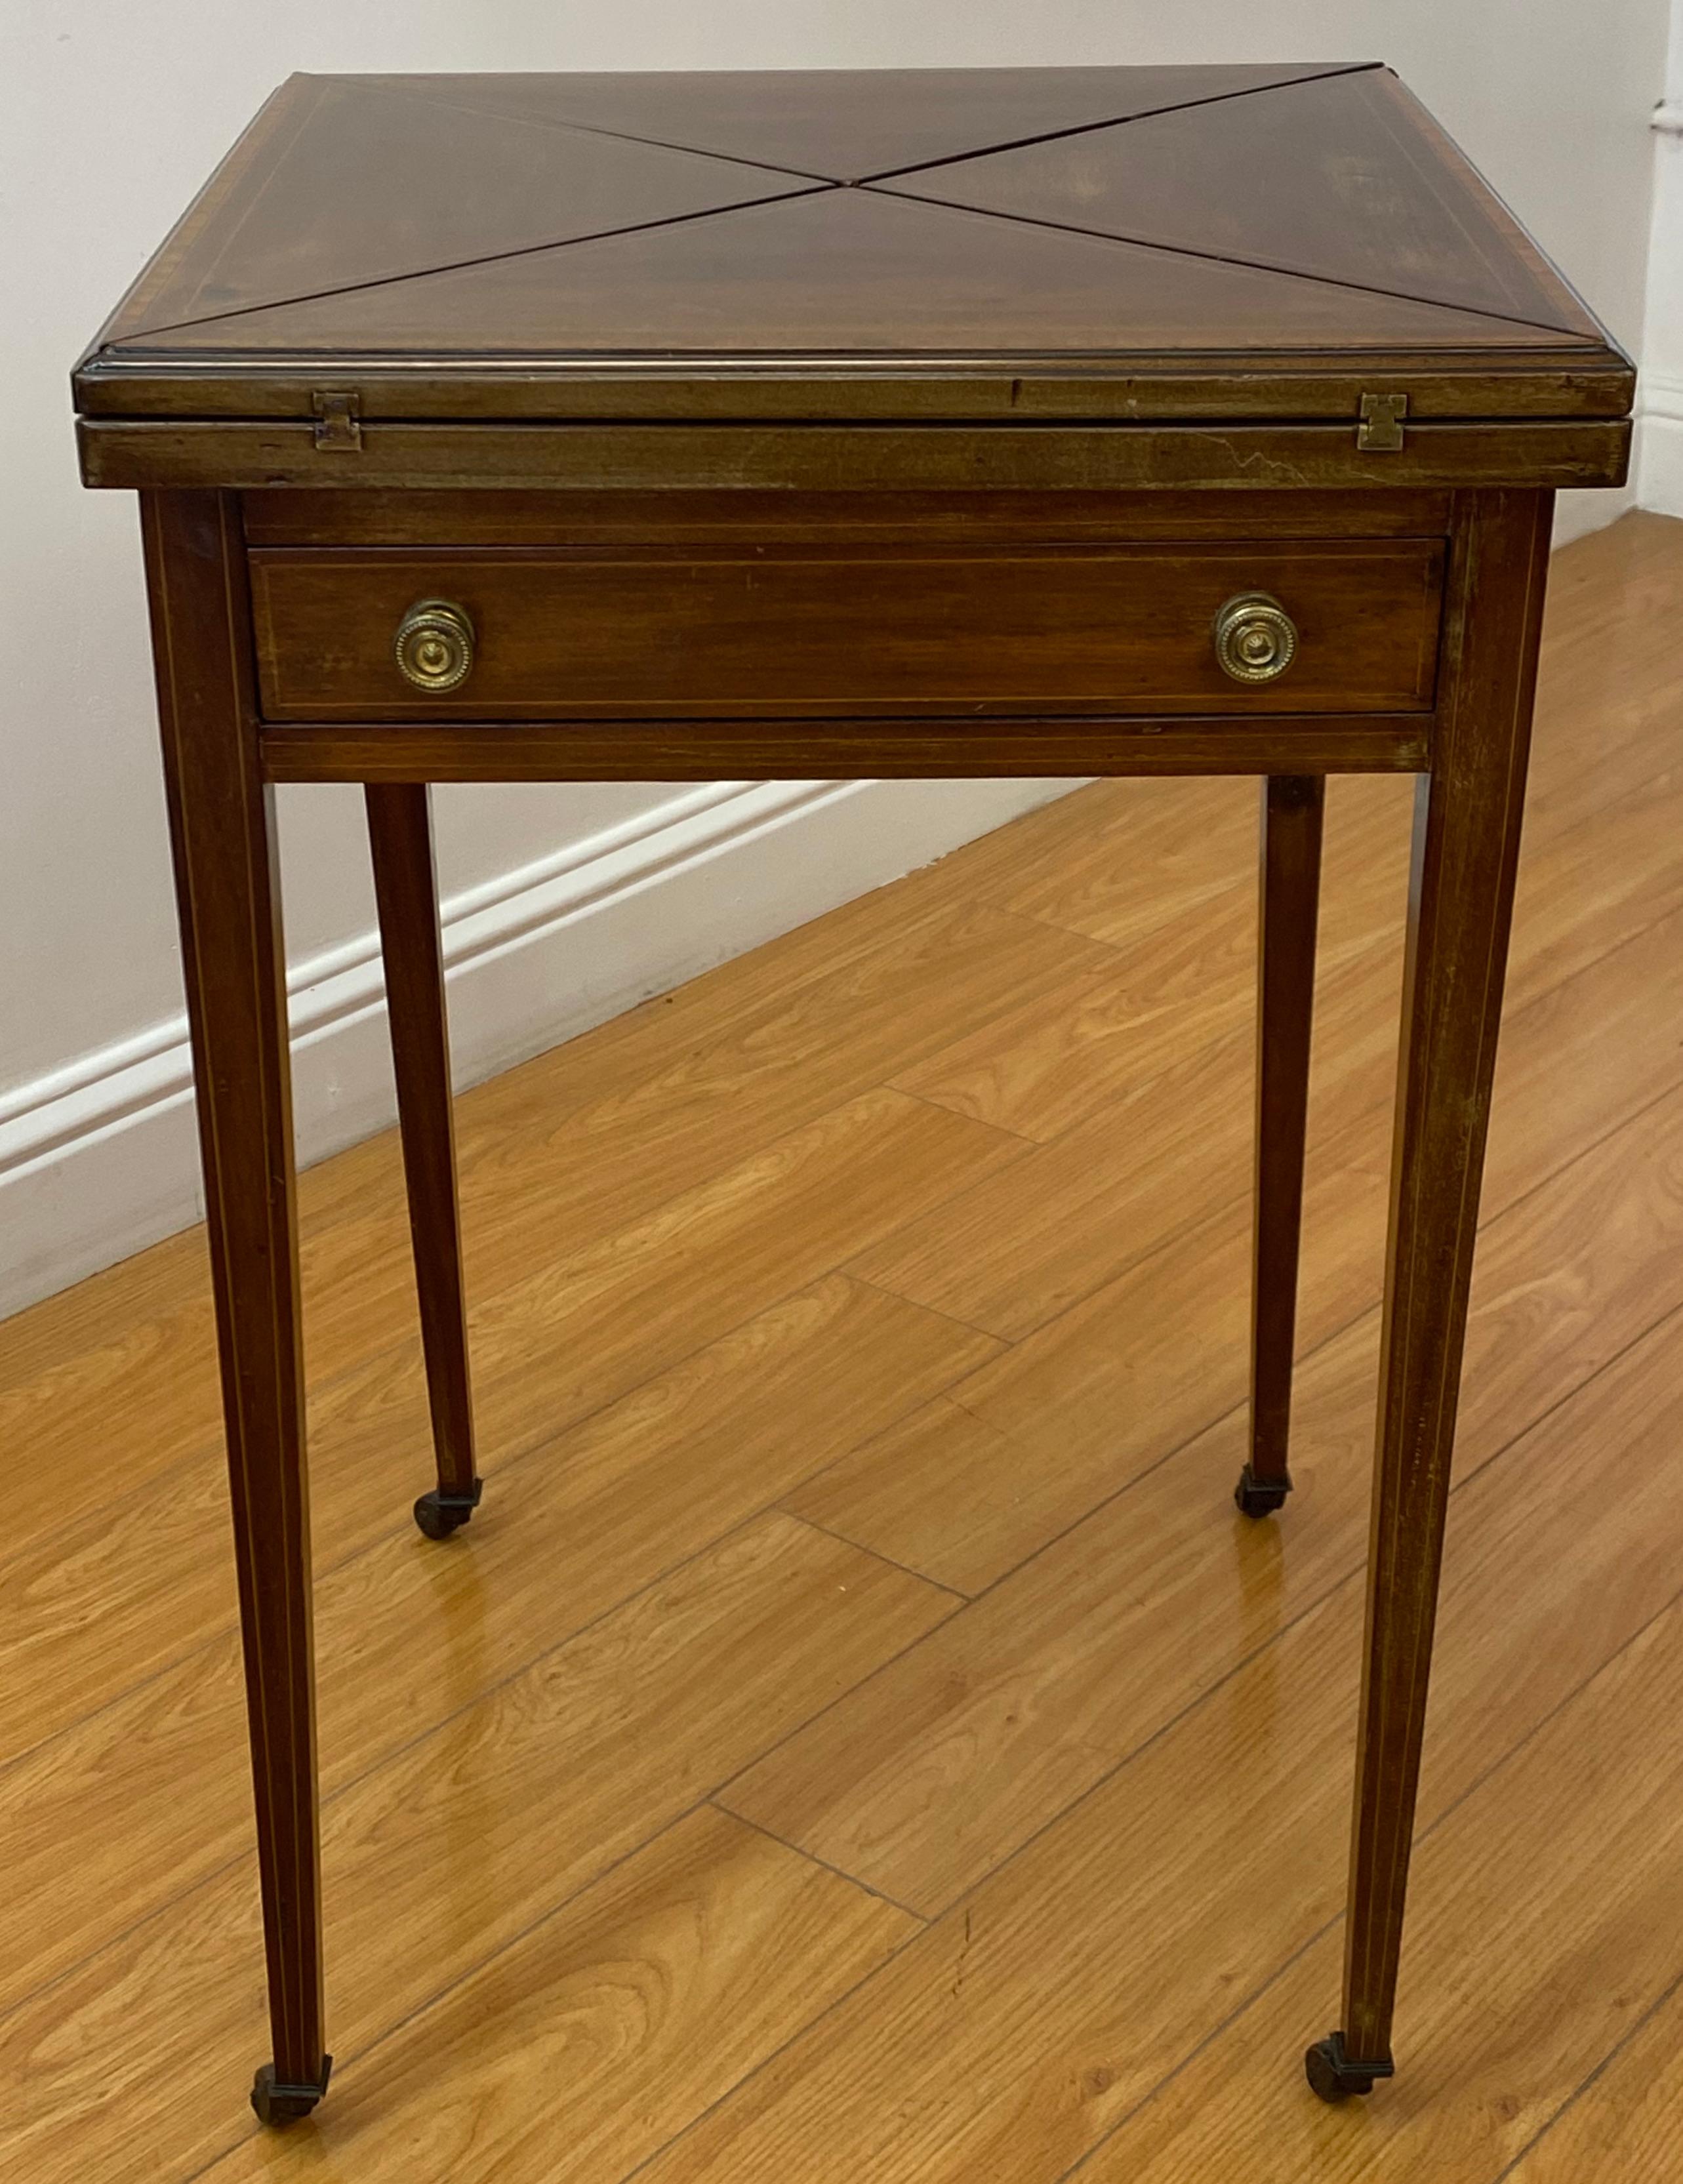 Vintage inlaid mahogany handkerchief folding games / side table, C.1940

One leg shows a past repair (as found, see pics)

The table folds open and closed. 

A fine side table (when closed)

A fun games table (when open)

20